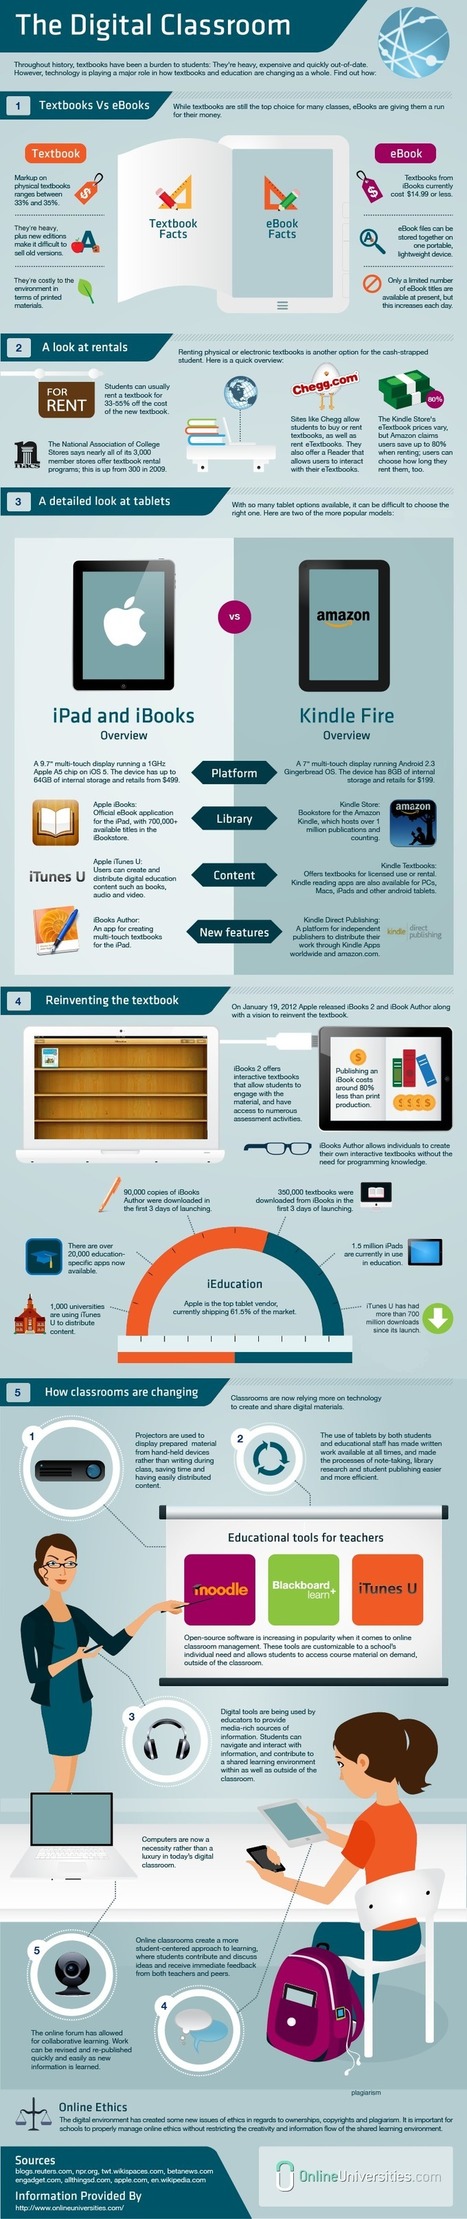 The Digital Classroom - an Infographic | Digital Delights - Digital Tribes | Scoop.it